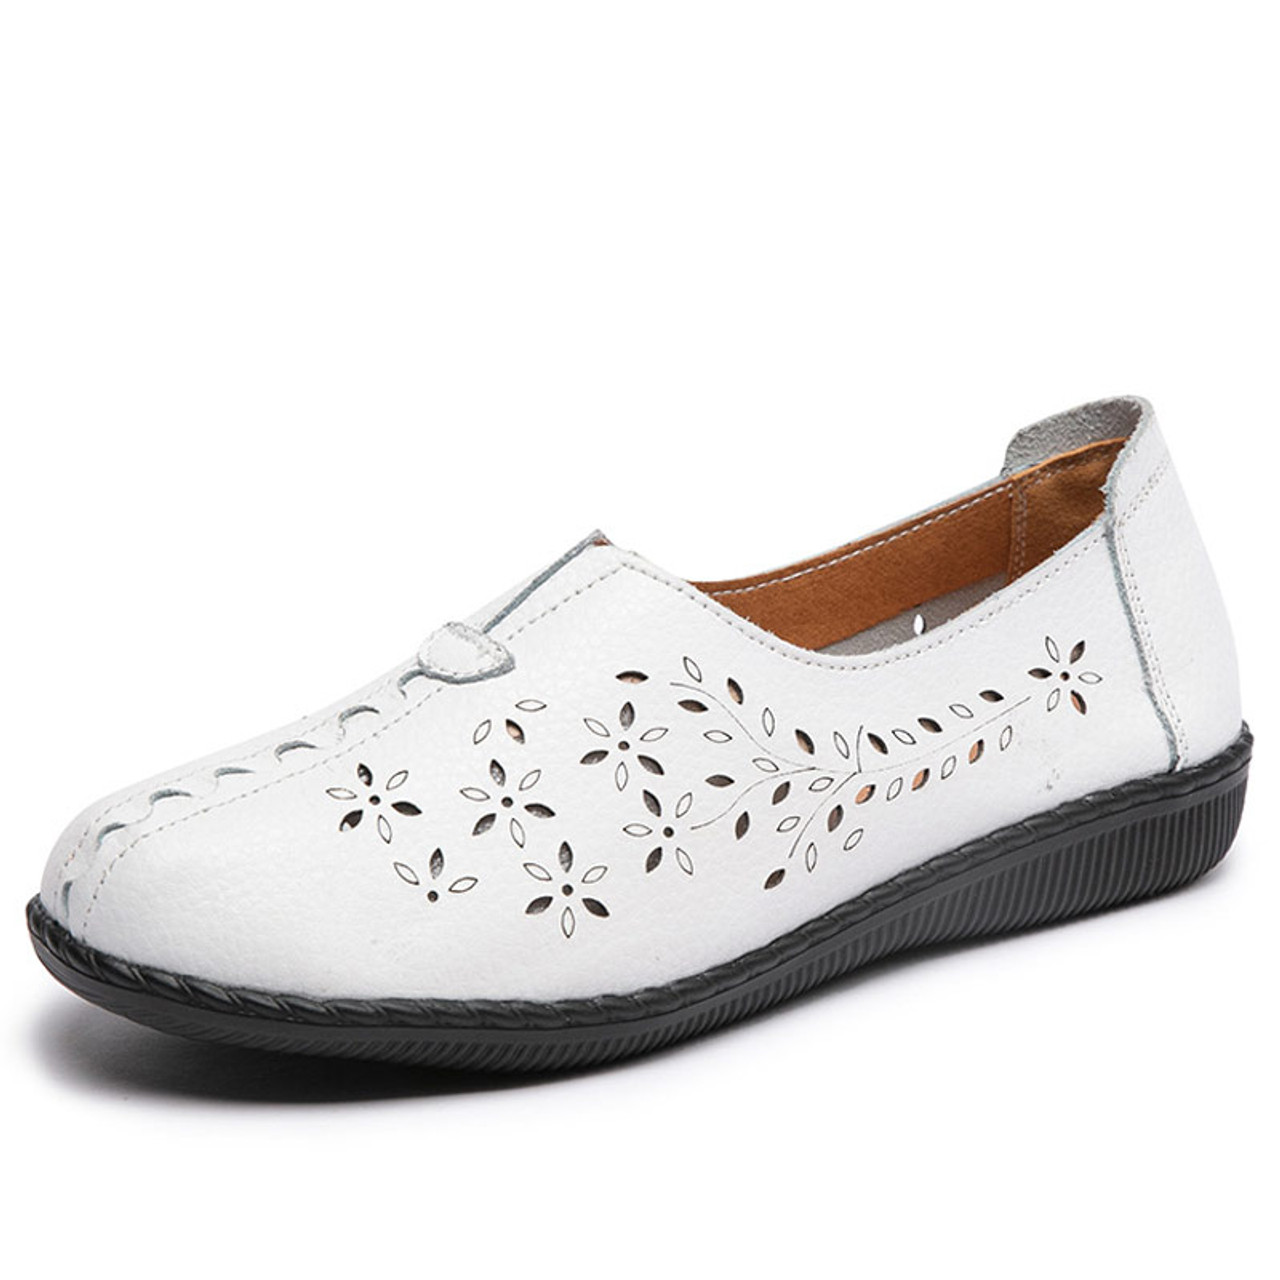 White floral hollow out slip on shoe loafer | Womens shoe loafers ...